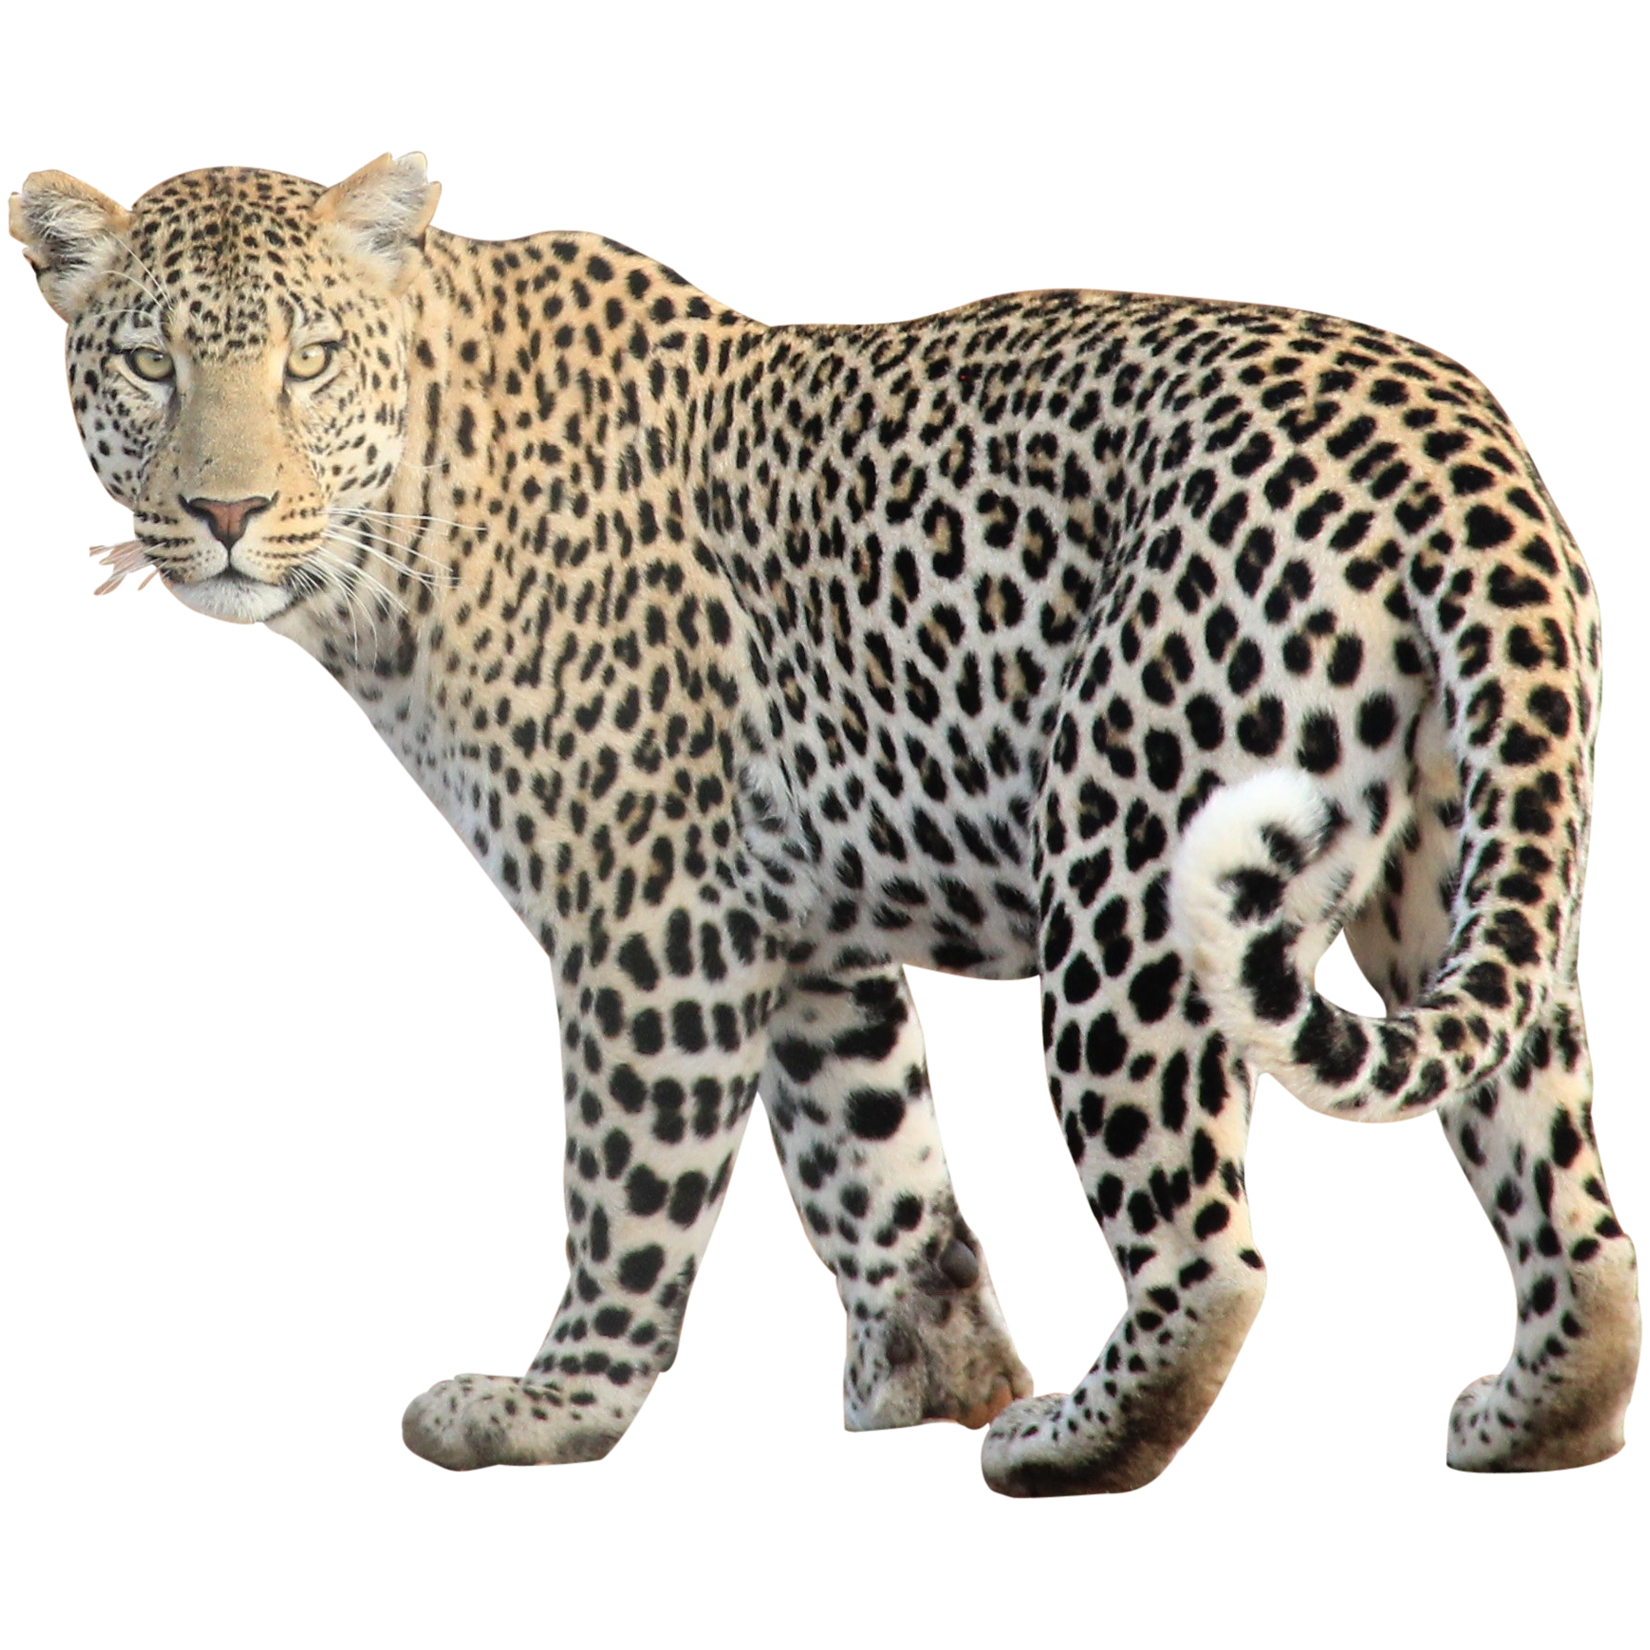 Leopard Free PNG Image 